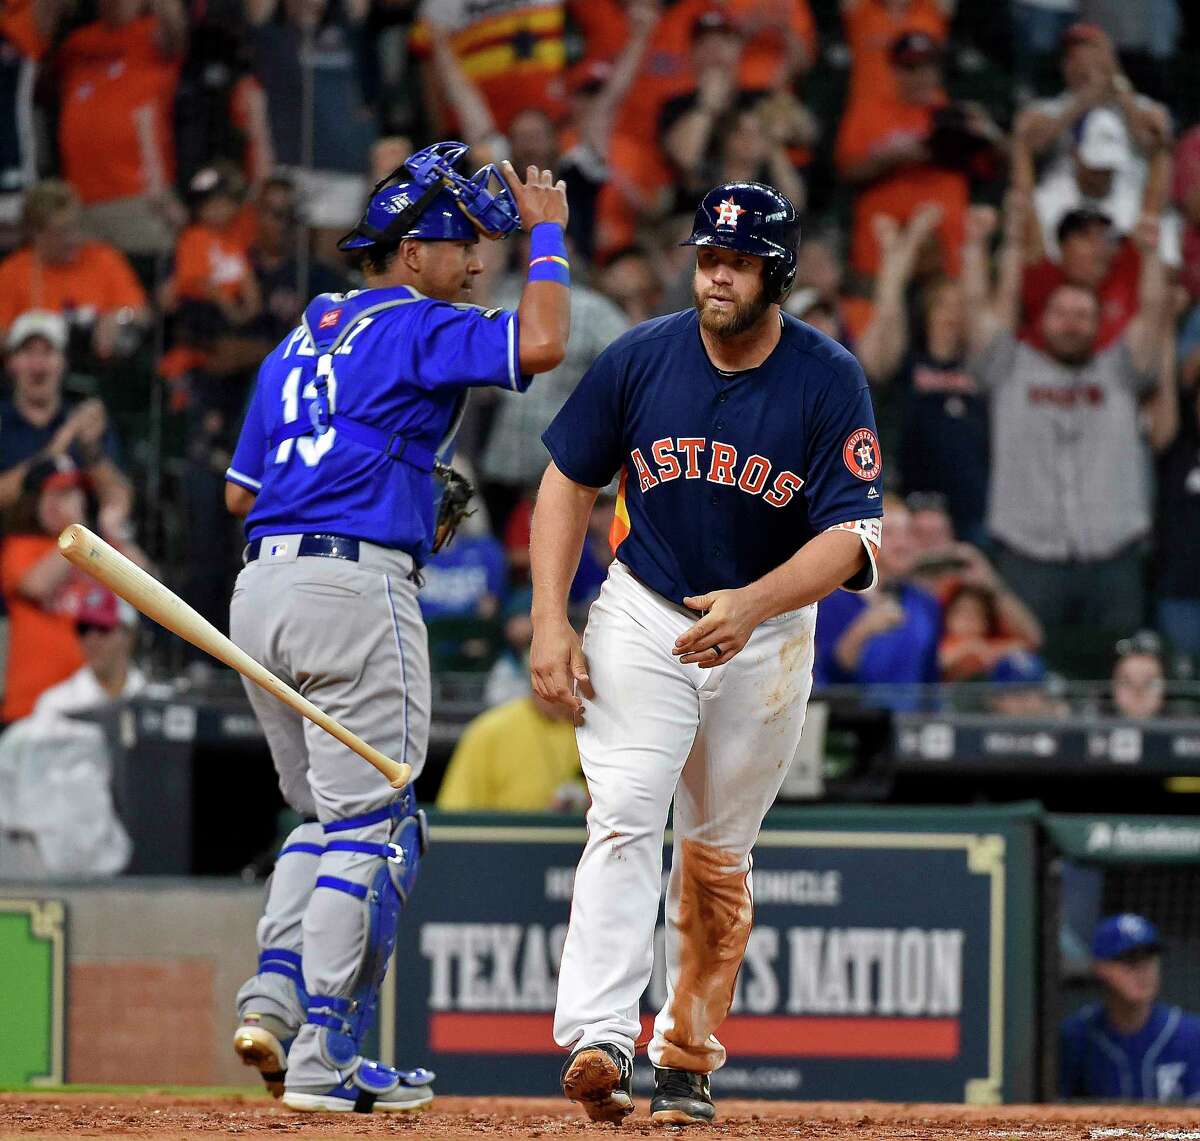 Houston Astros designated hitter Evan Gattis tosses his bat after drawing a bases-loaded walk to score George Springer and win the baseball game against the Kansas City Royals in twelve innings, Sunday in Houston.